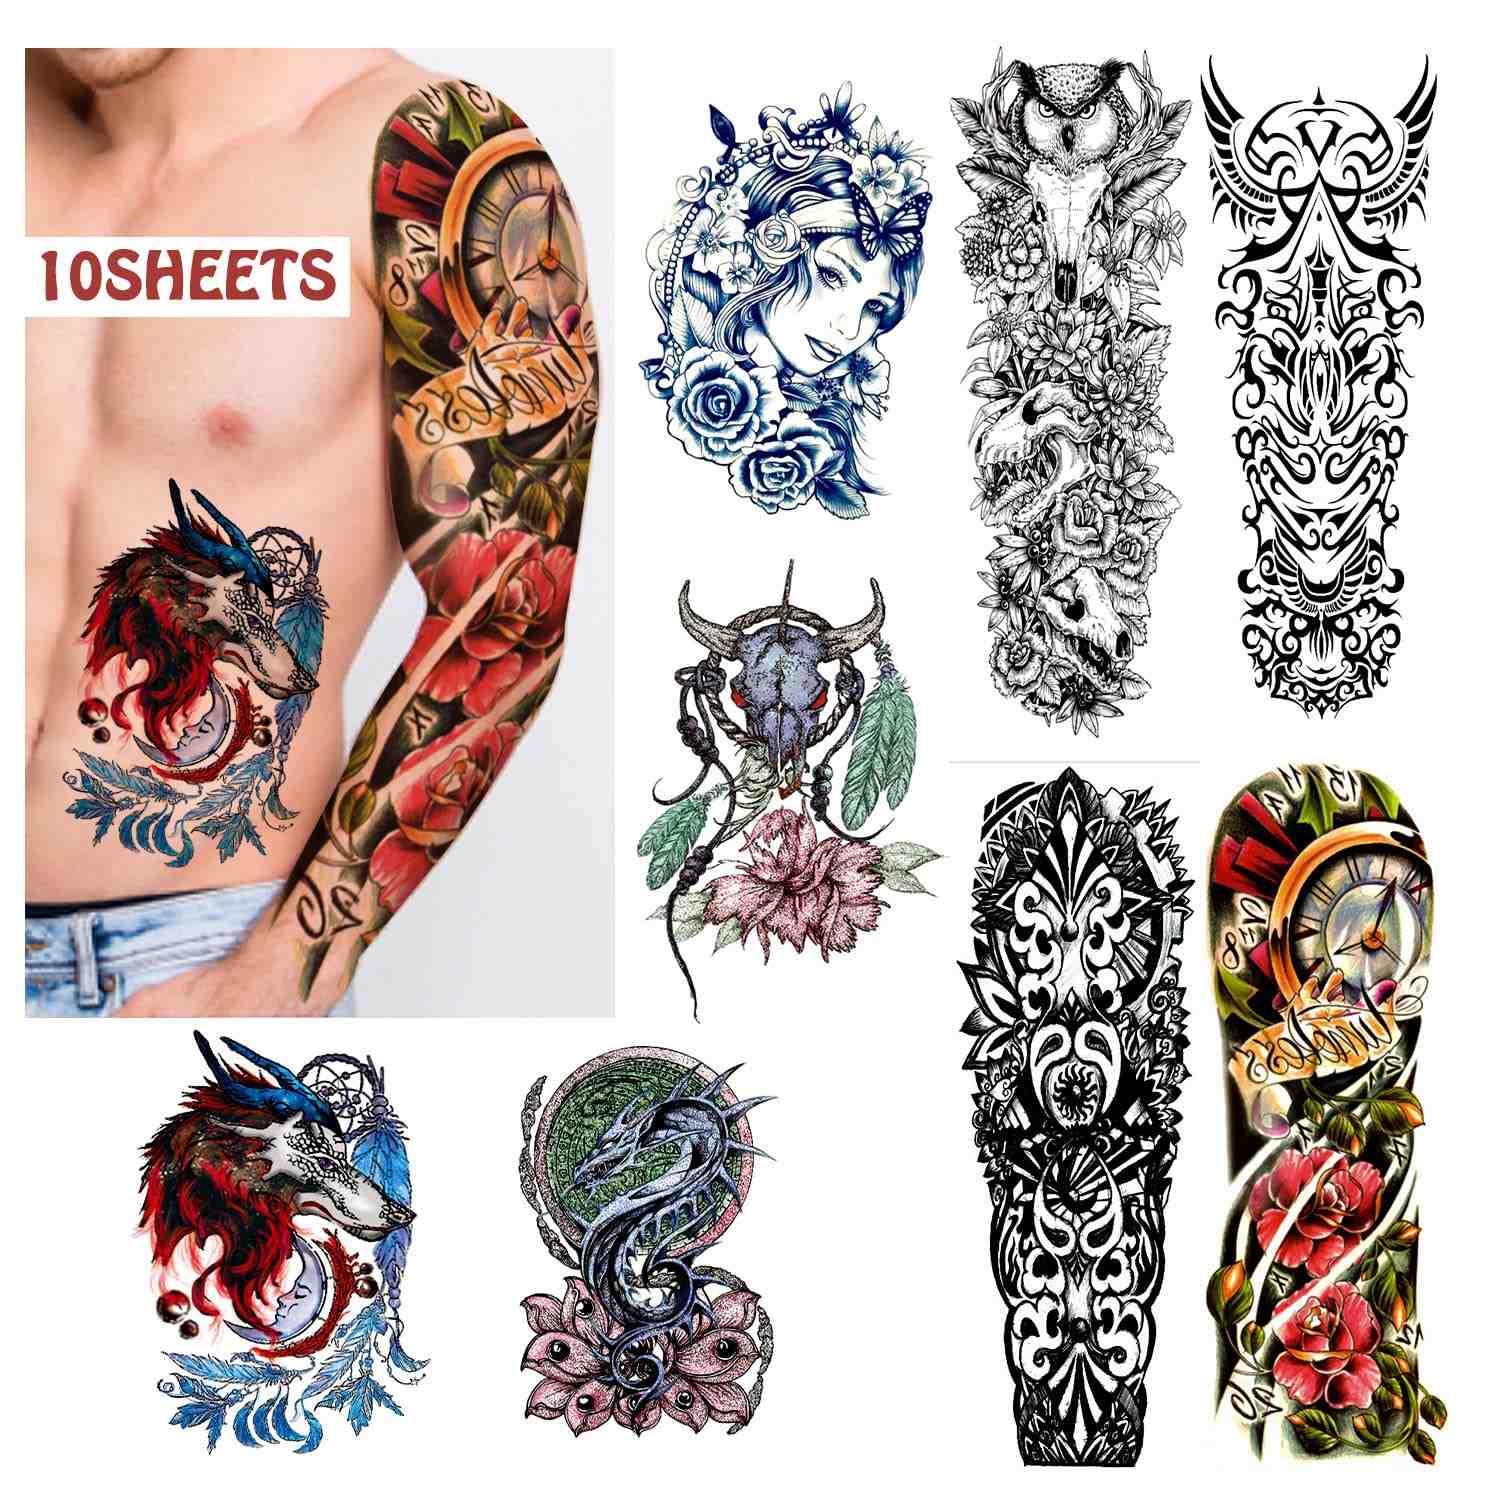 How much is a full sleeve tattoo?